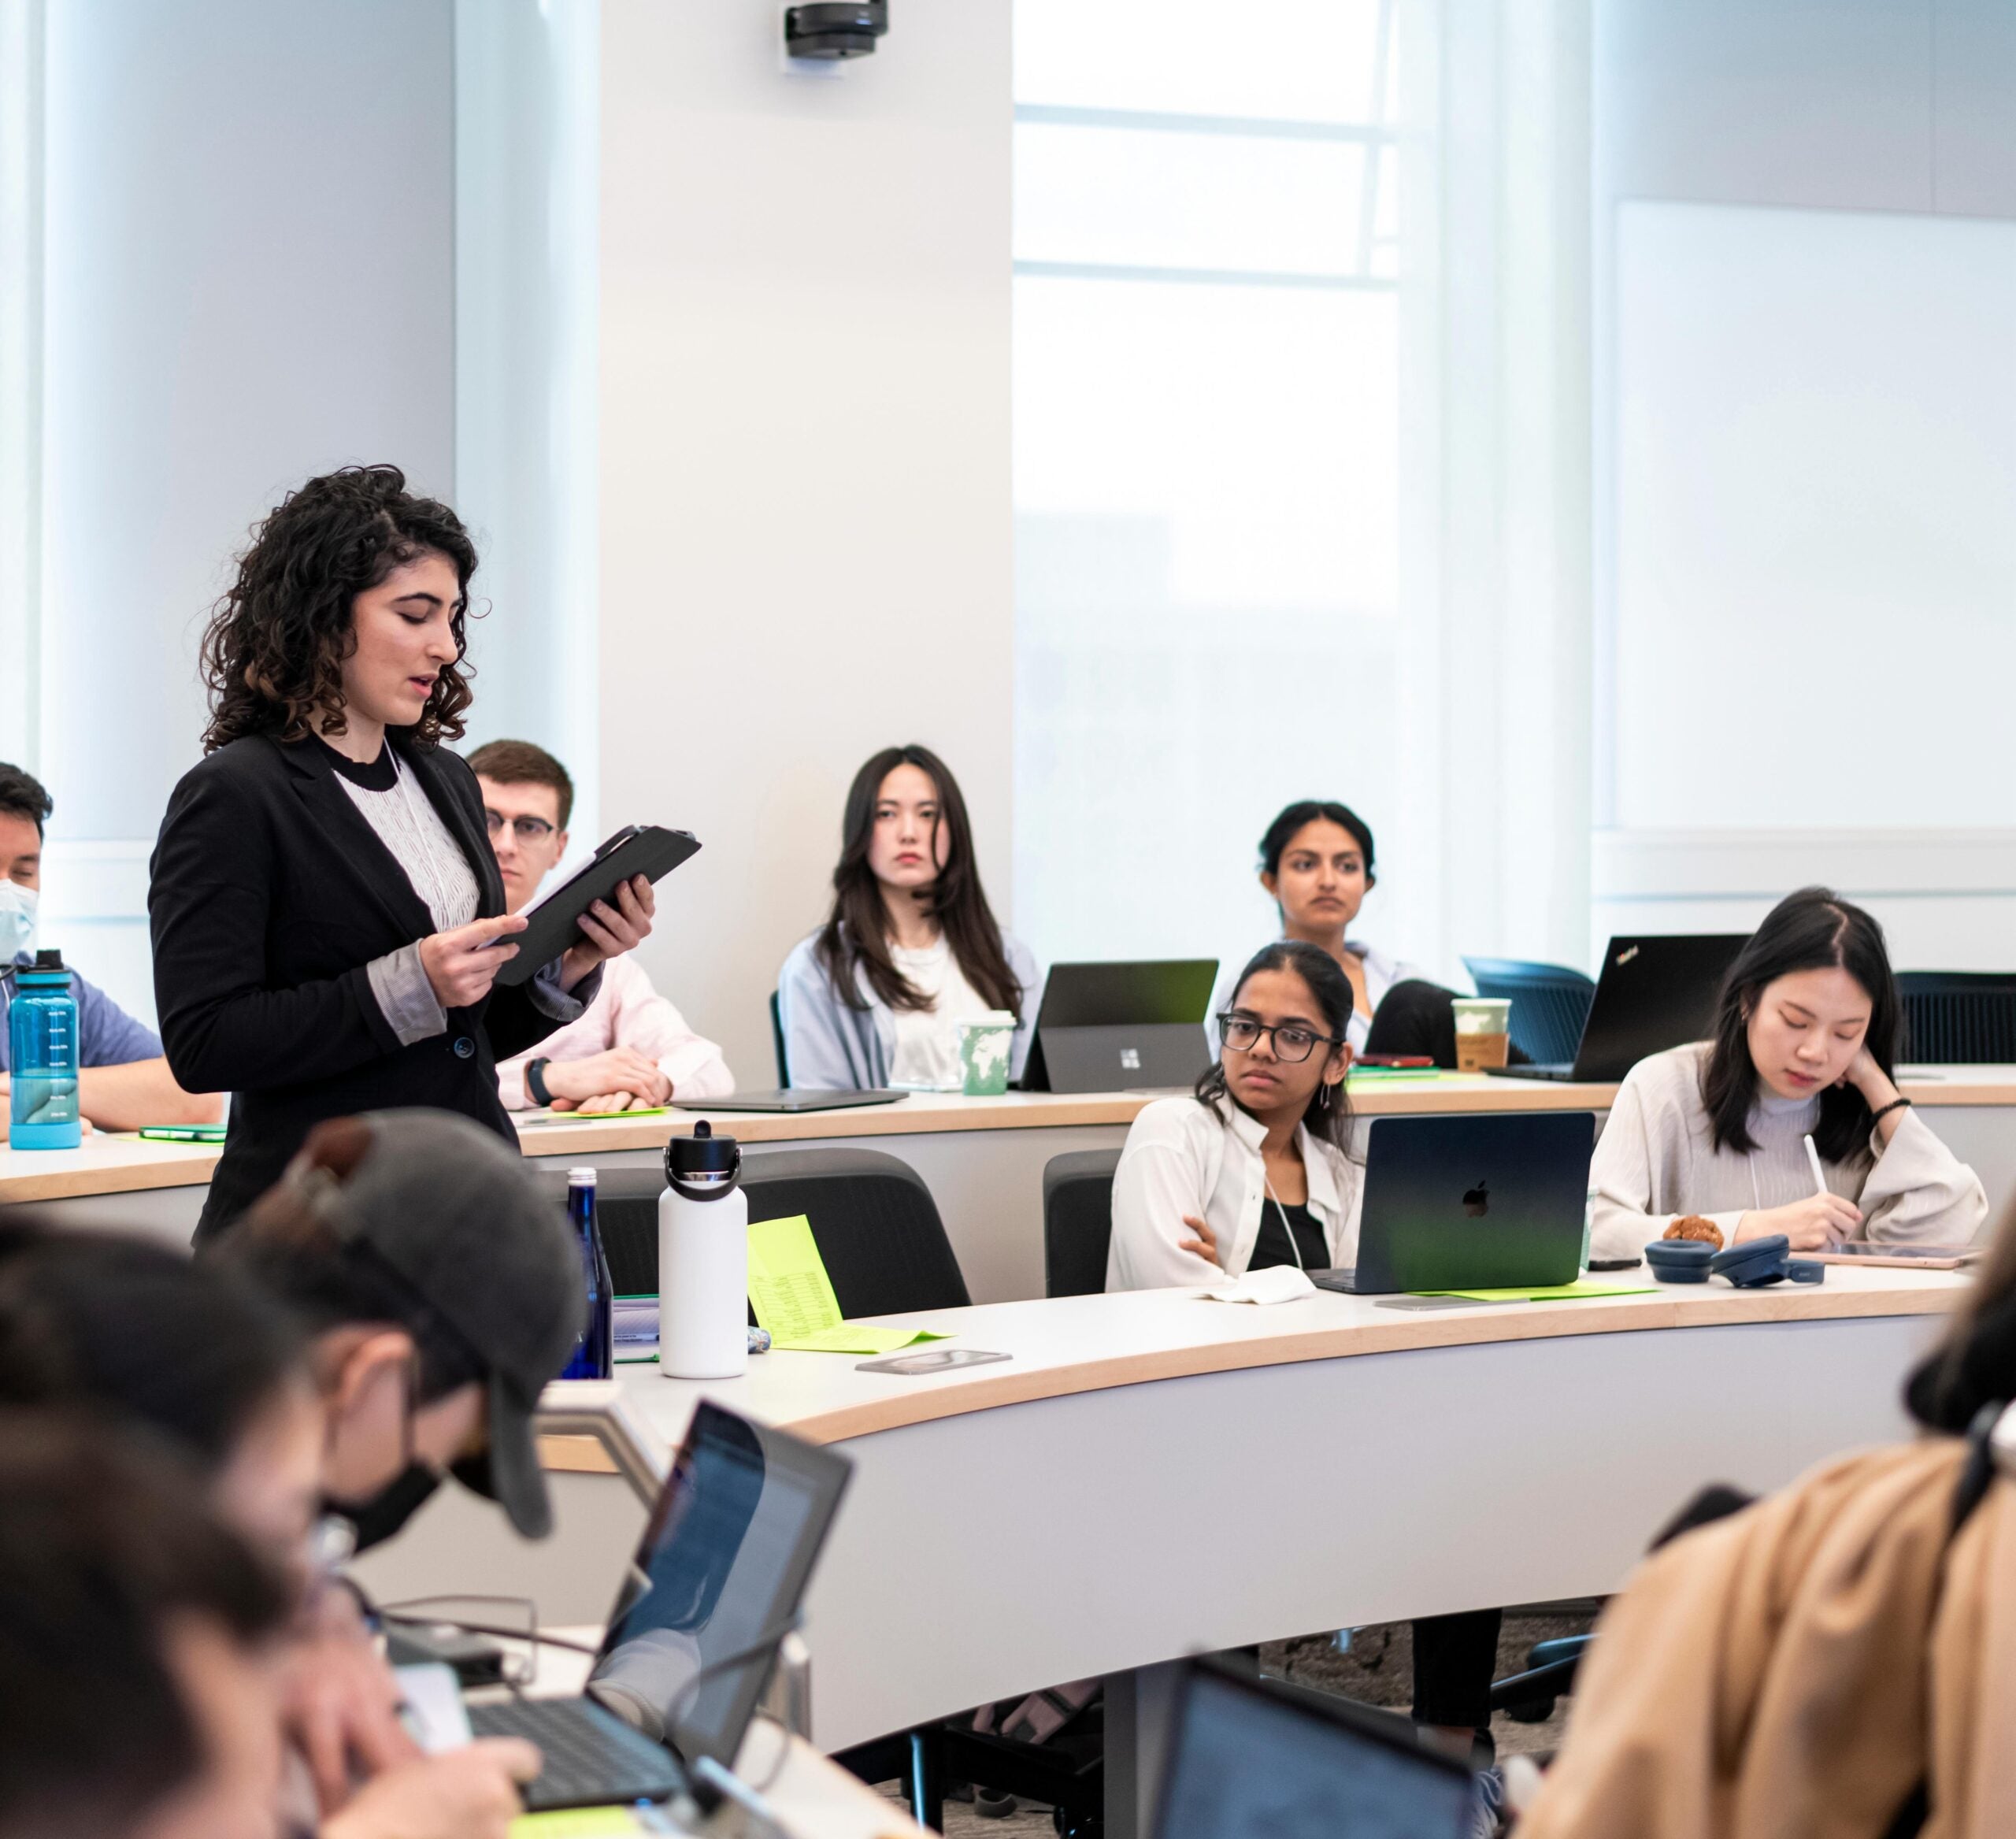 Students participating in a classroom at the McCourt School of Public Policy.